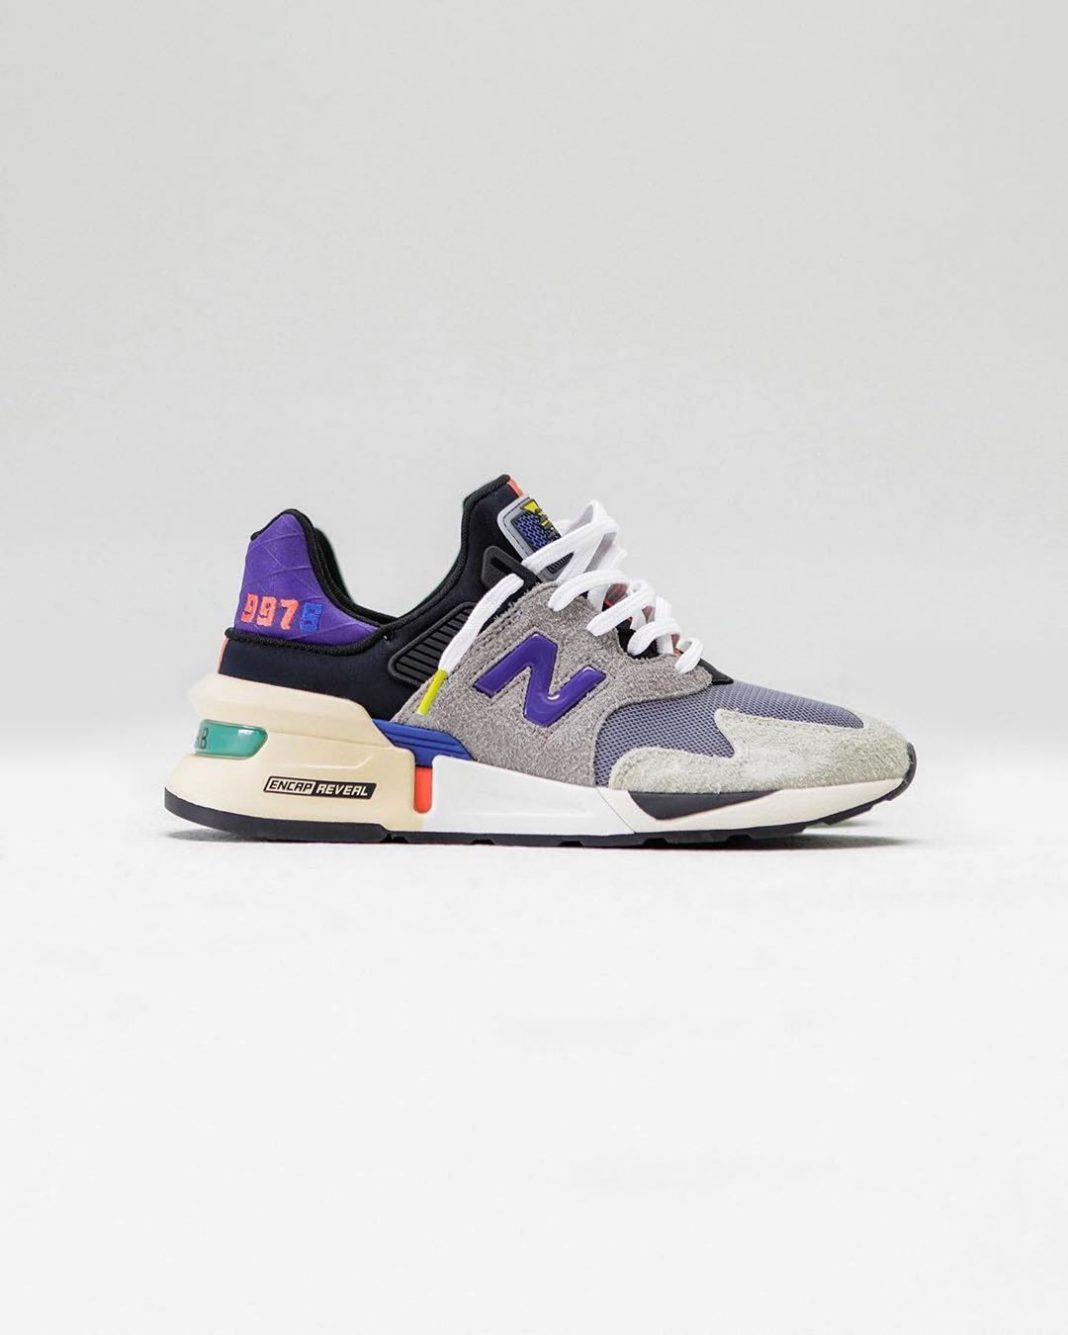 @bodega introduces a new collaboration with New Balance  Thoughts?...